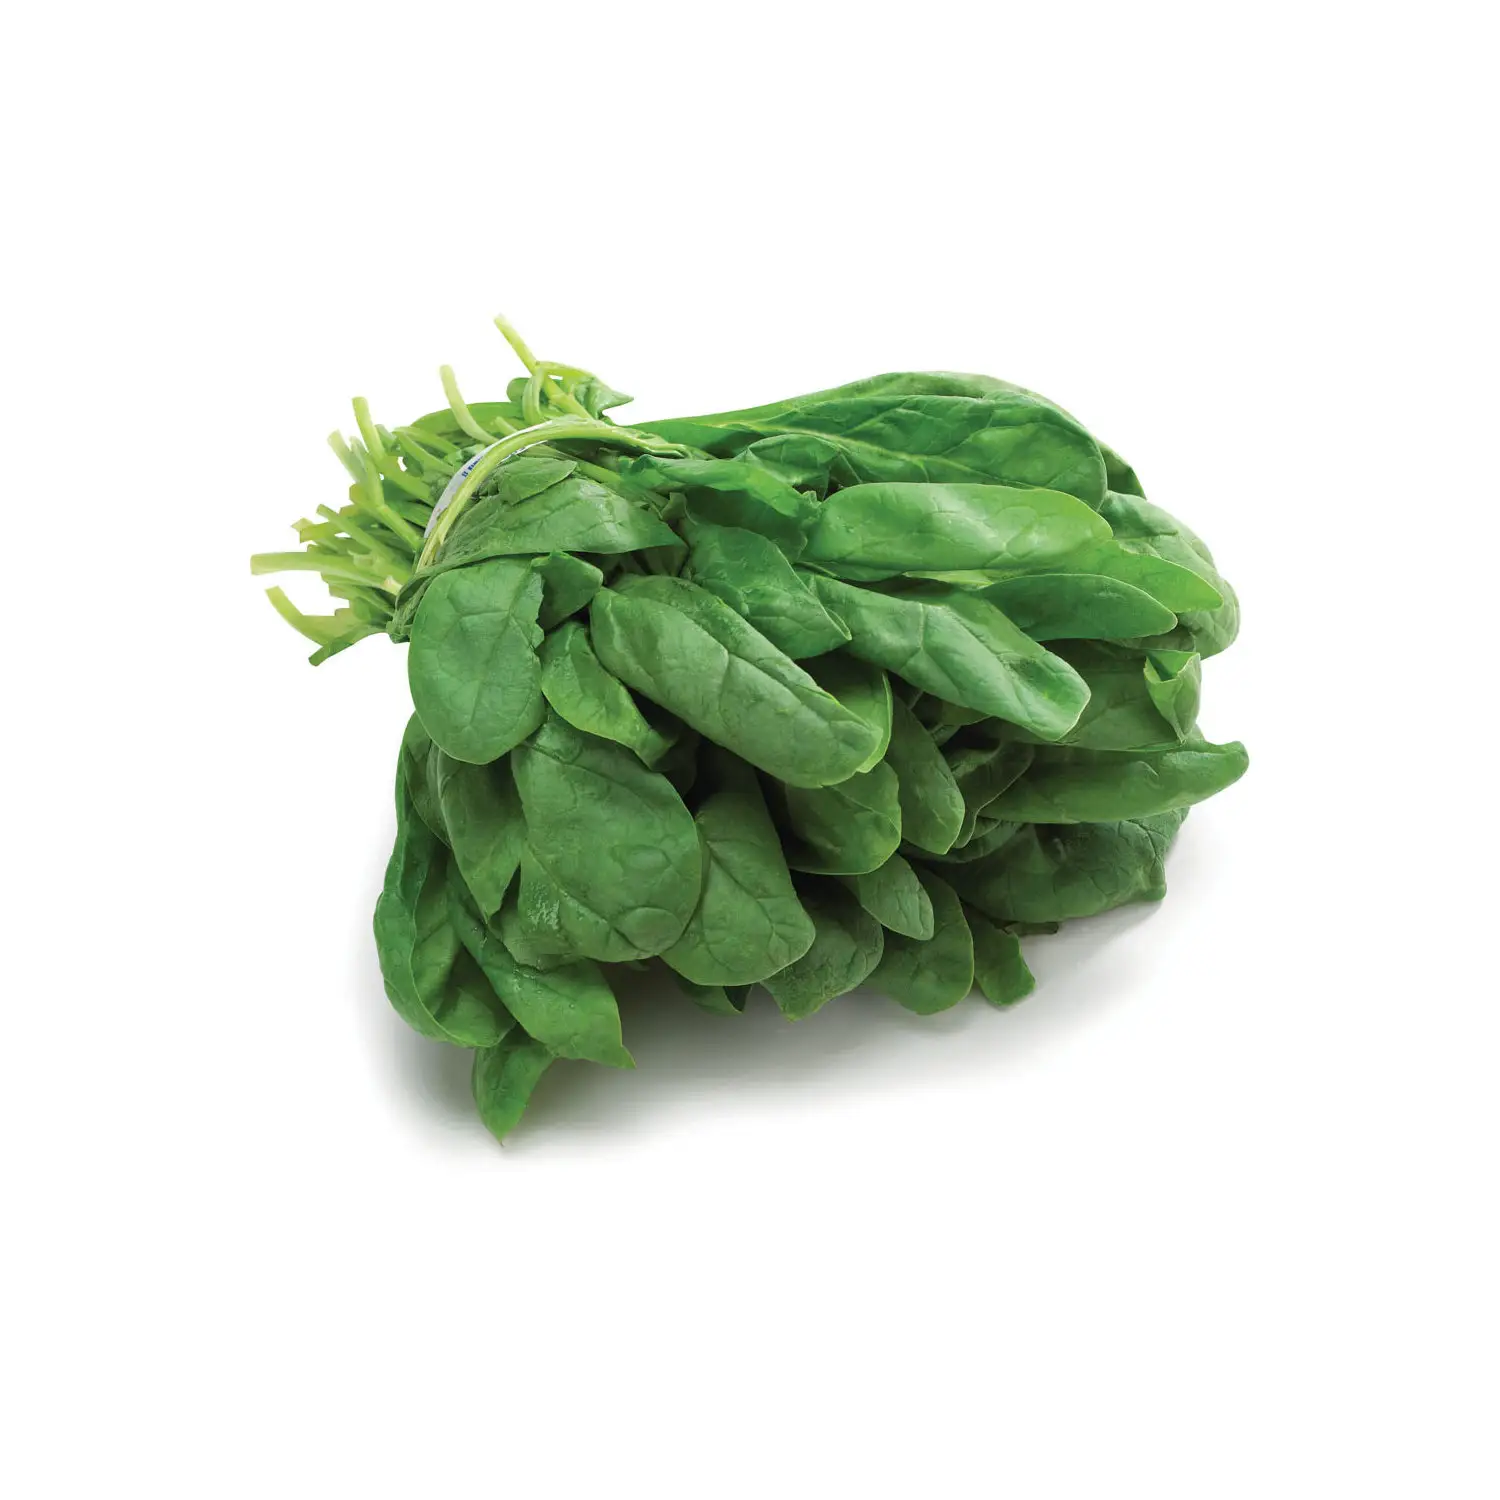 Natural Fresh Green Spinach,green Vegetables 100% Fresh 10 - 20 Days from ZA 8 Cm COMMON Cultivation Cutomers' Requirement